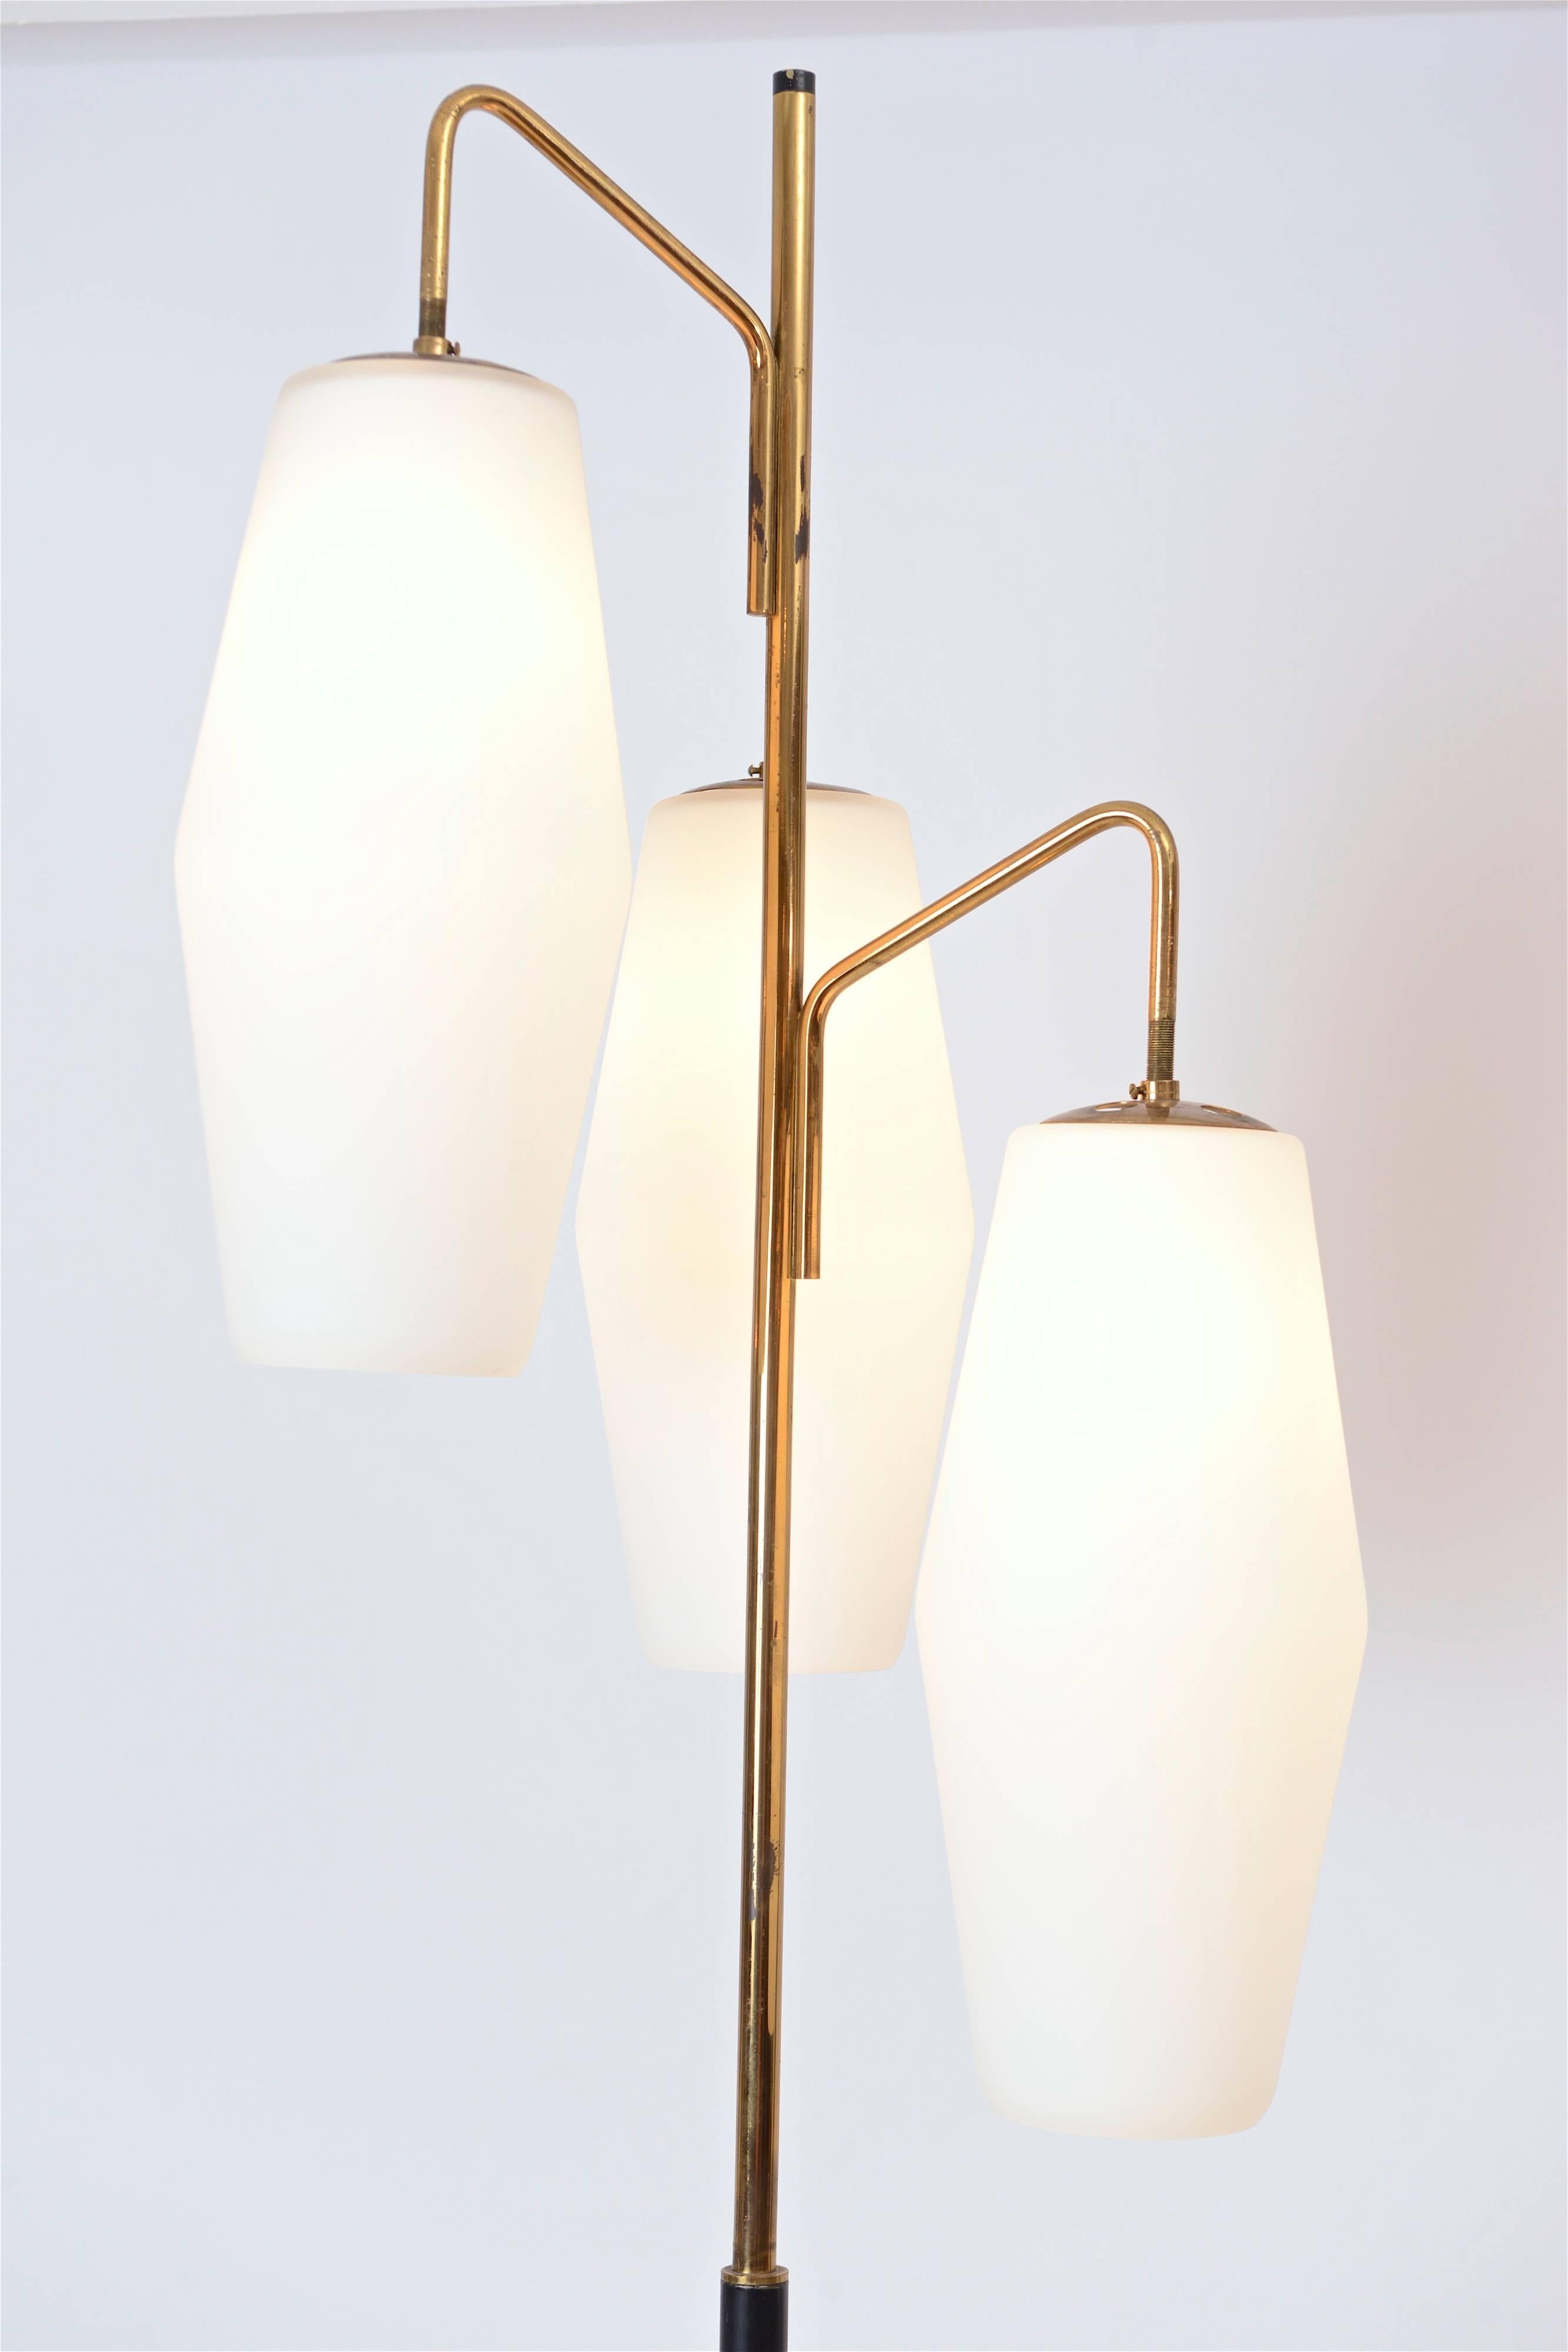 A wonderful three-shade opaline floor lamp by the celebrated Italian lighting company, Stilnovo. Produced in the early 1960s, the ‘4052’ design features three elongated milk-glass shades, all of which are staggered at different heights. The lower